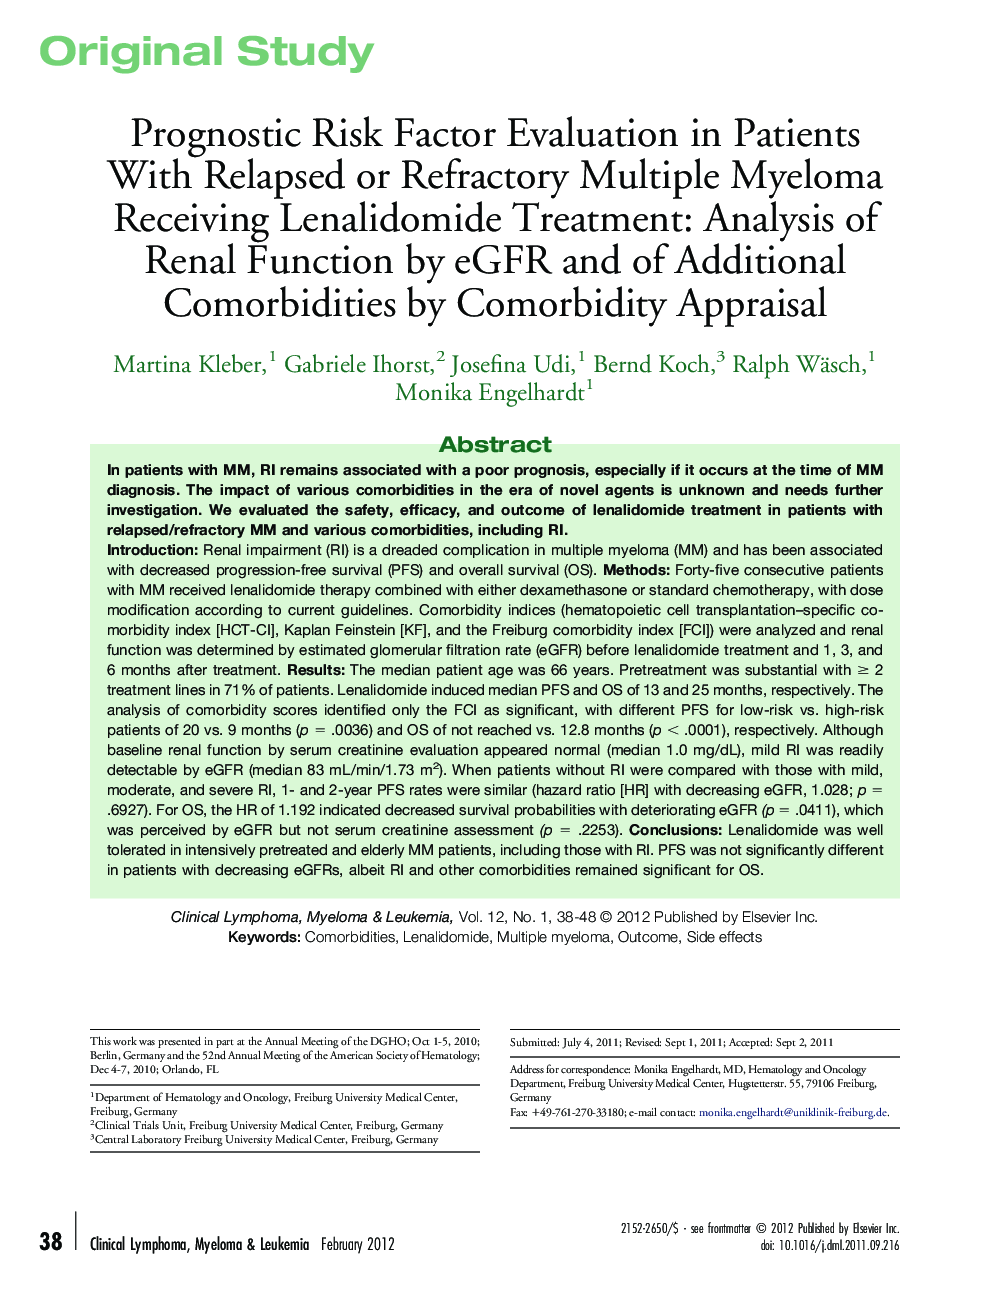 Prognostic Risk Factor Evaluation in Patients With Relapsed or Refractory Multiple Myeloma Receiving Lenalidomide Treatment: Analysis of Renal Function by eGFR and of Additional Comorbidities by Comorbidity Appraisal